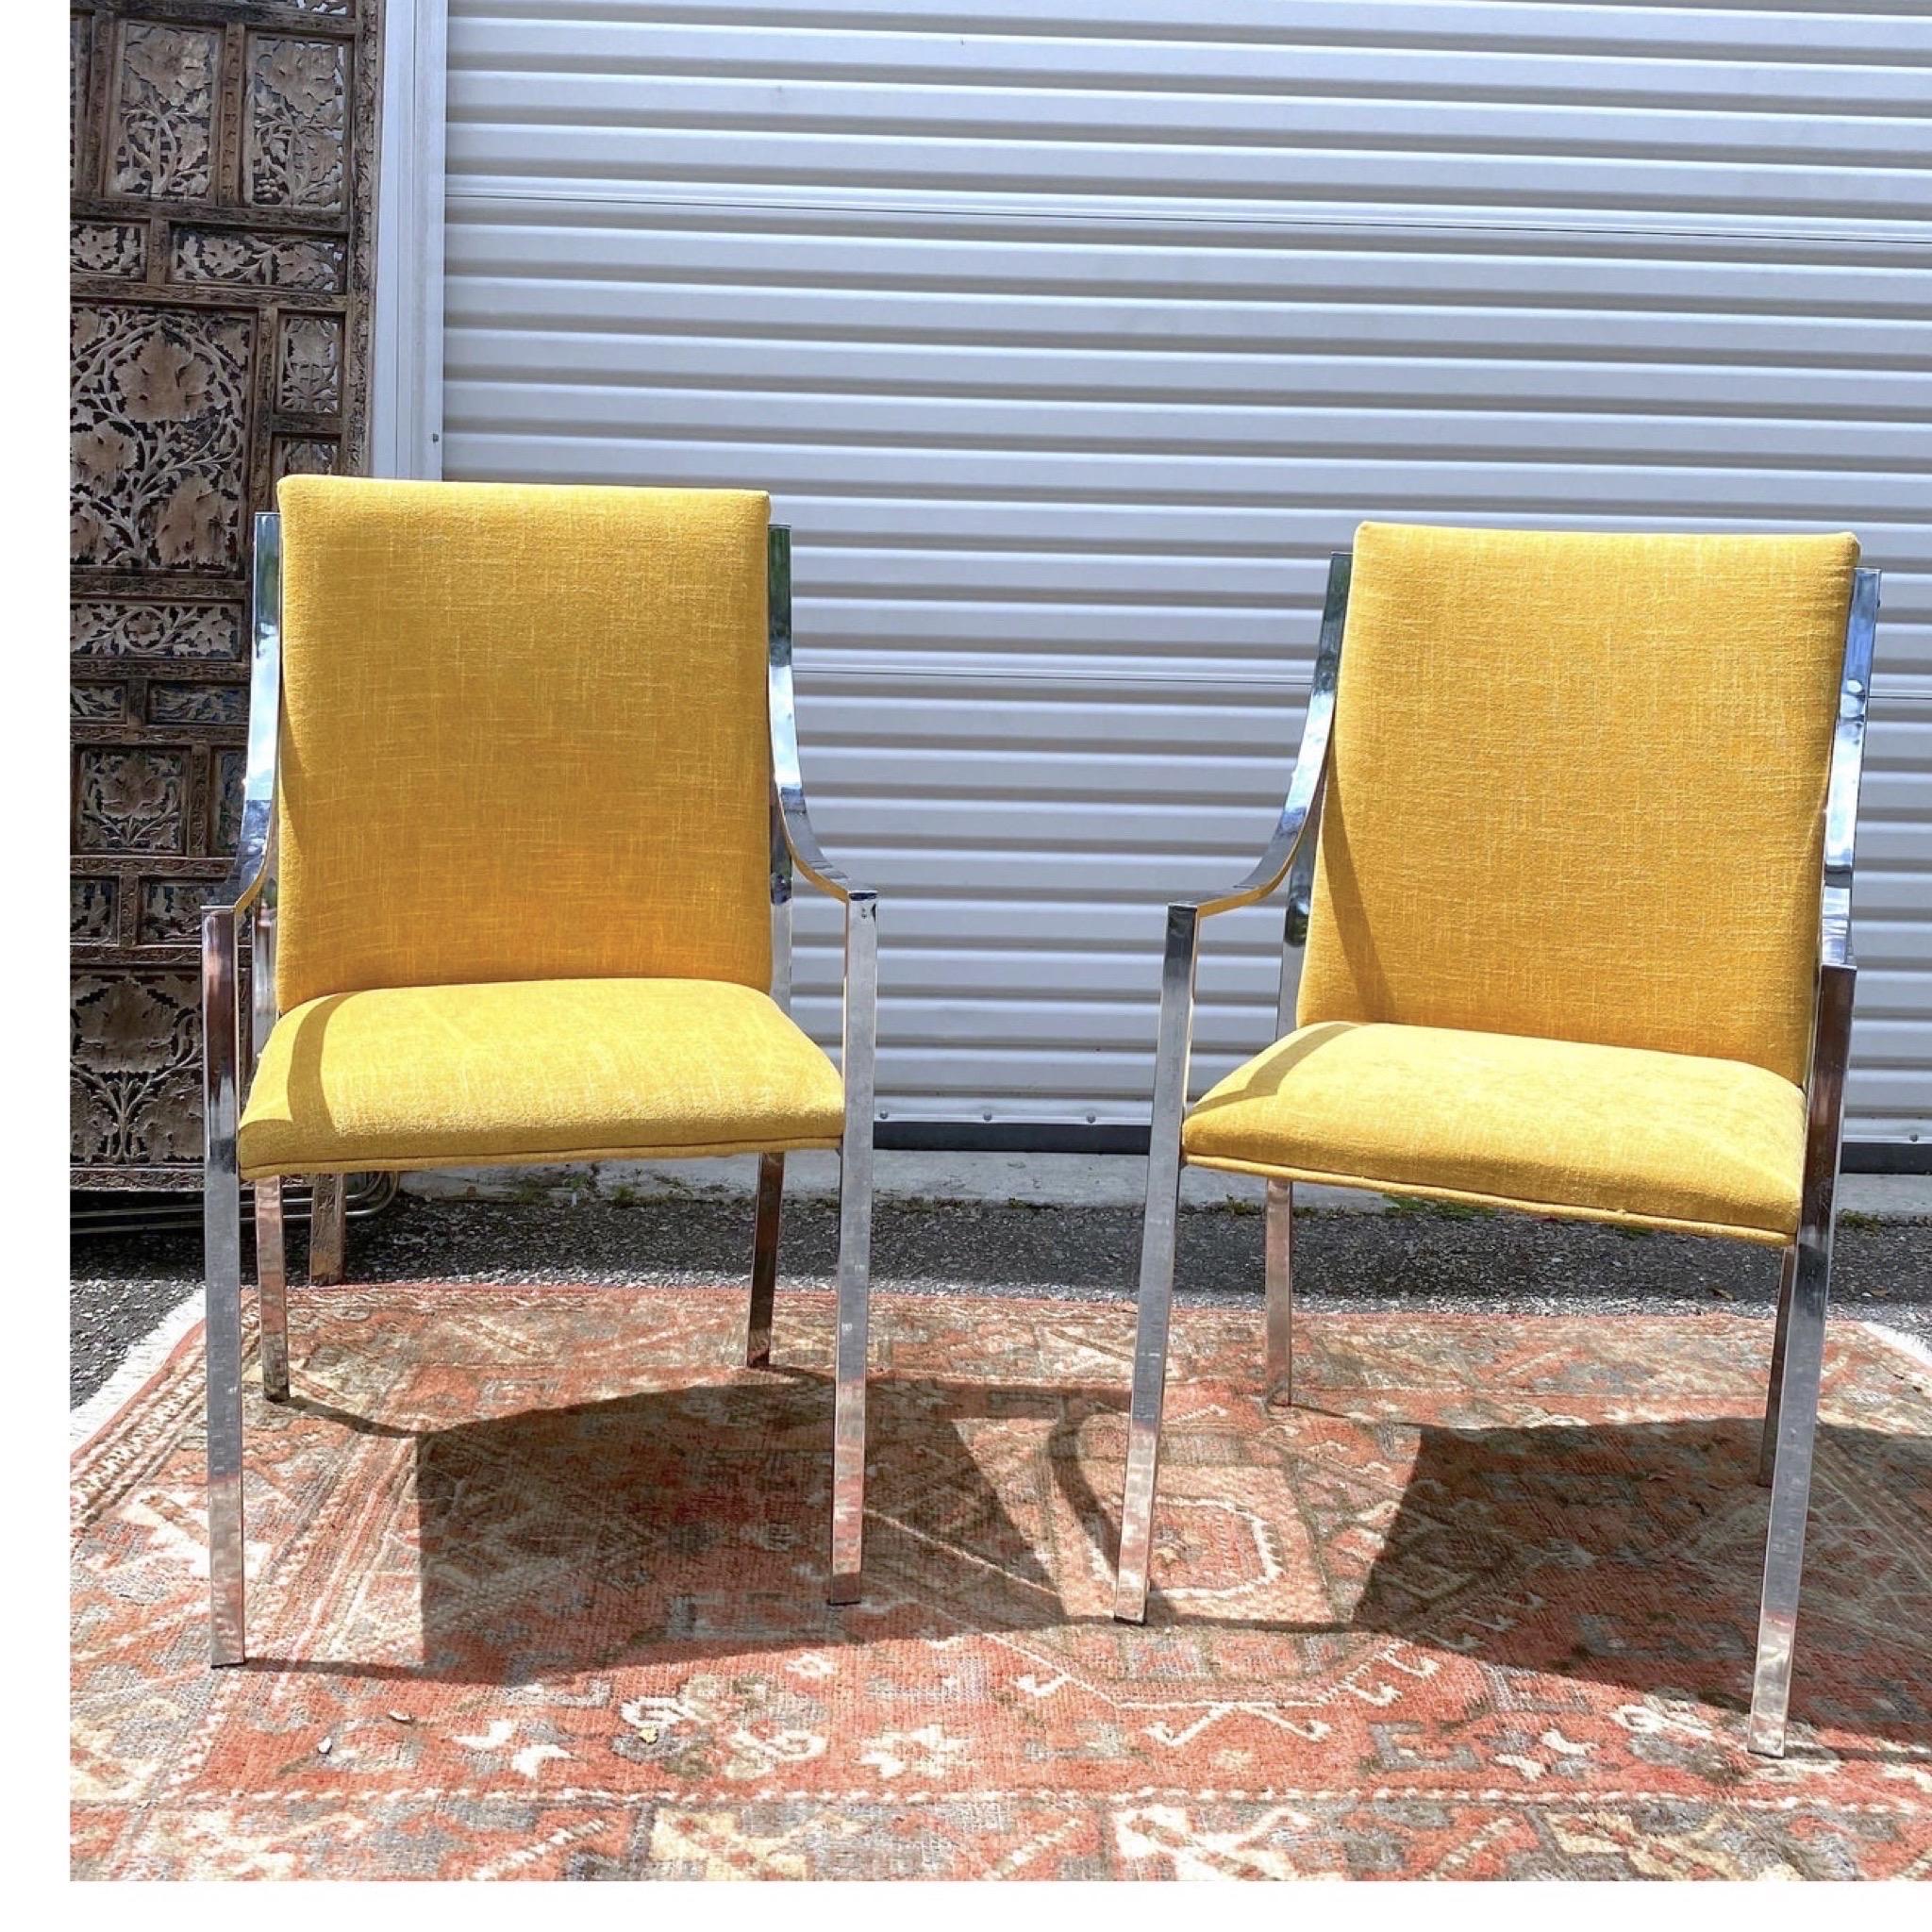 Pierre Cardin for Dillingham Chrome Occasional chairs - pair
Newly upholstered in a bright mustard yellow, these chrome chairs have super sleek lines. I went with a solid color so the frame of the chair stood out over the upholstery.

Set of 2